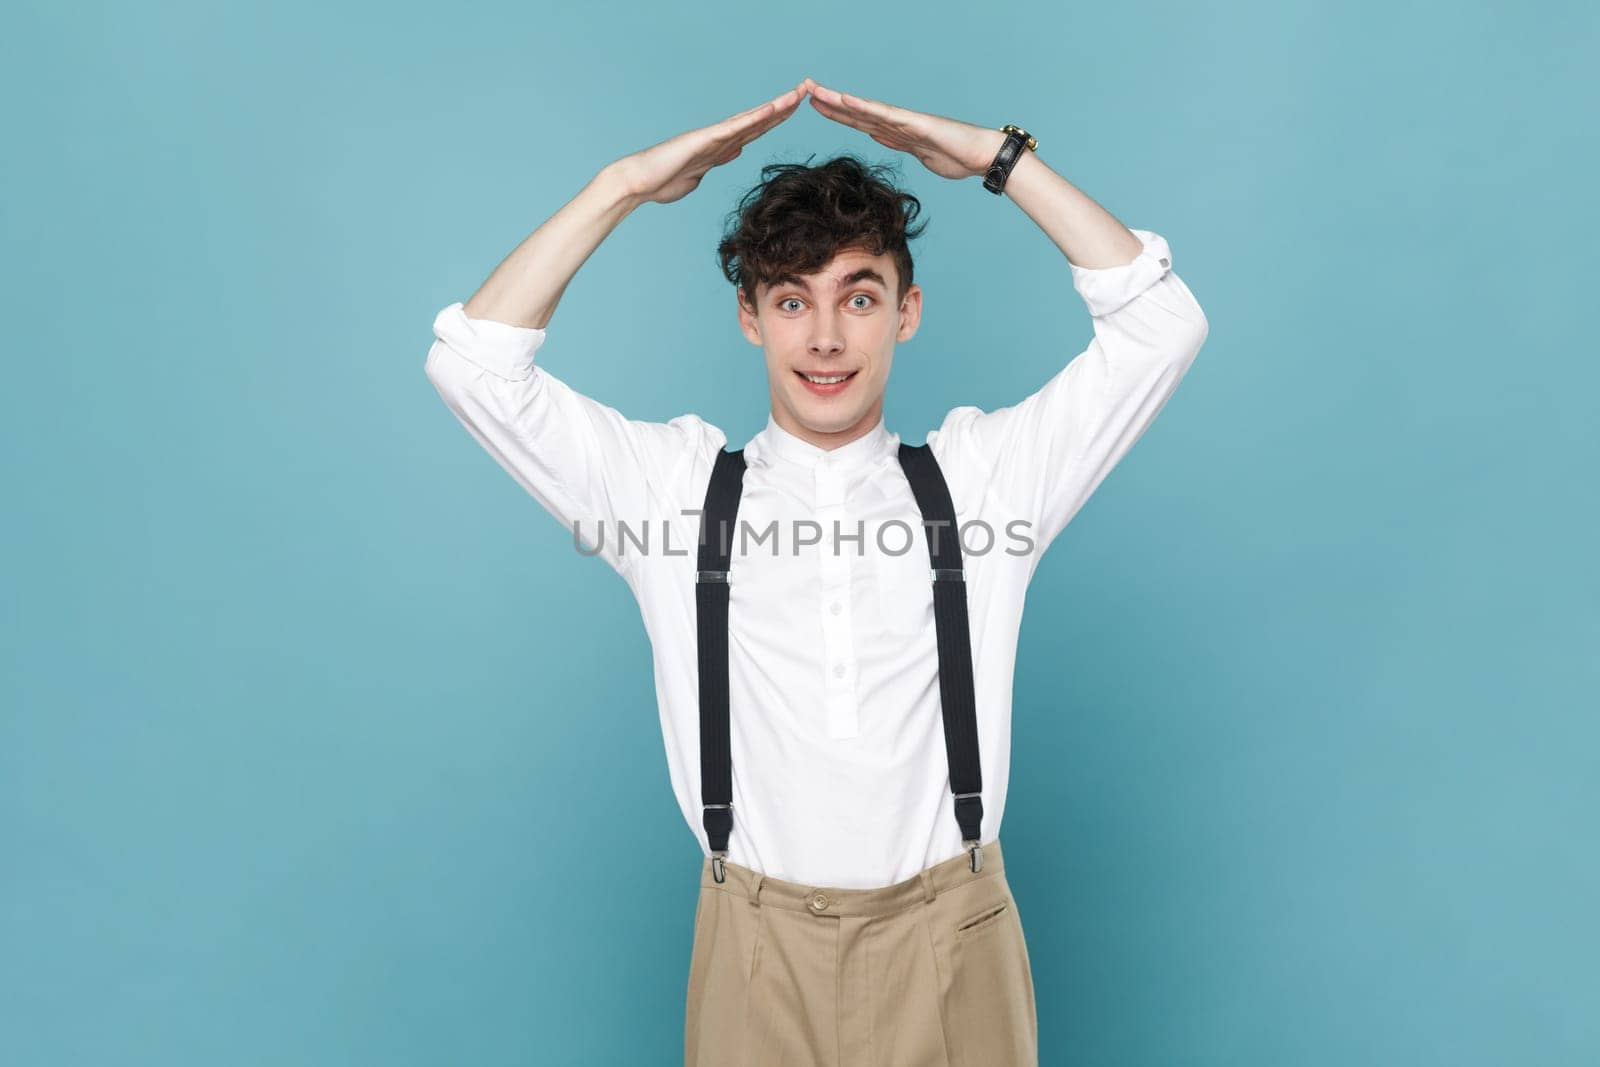 Happy to feel safe. Portrait of man wearing white shirt and suspender showing house roof symbol over head, smiling joyfully, gesture of protection. Indoor studio shot isolated on blue background.